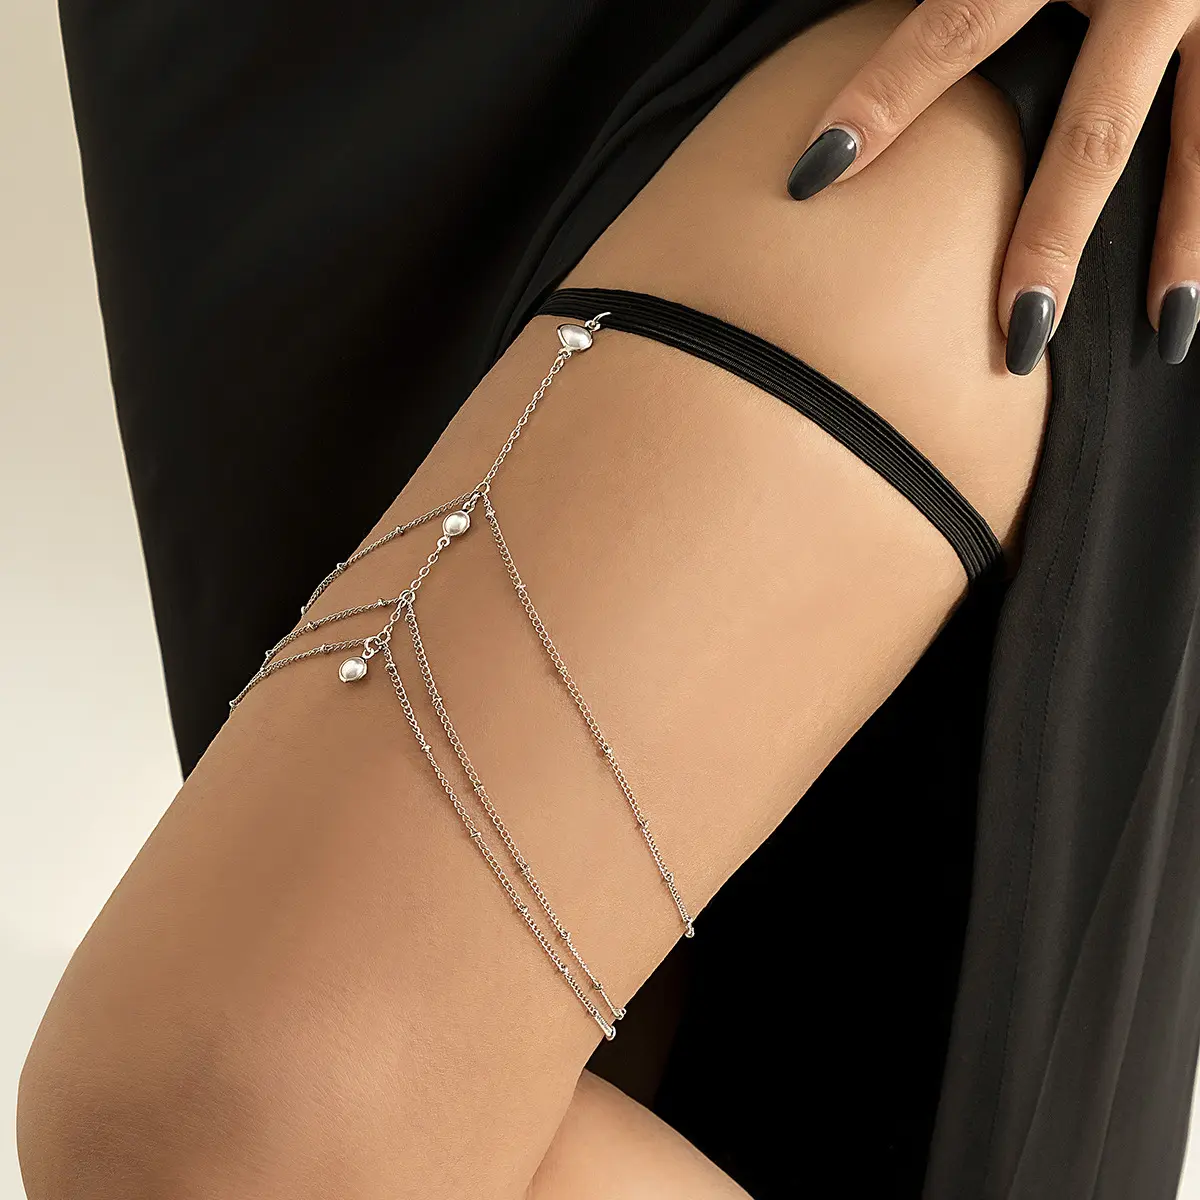 Factory Wholesale Beach Body Jewelry Women Sexy Multilayer Pearl Tassel Adjustable Elastic Thigh Leg Chain